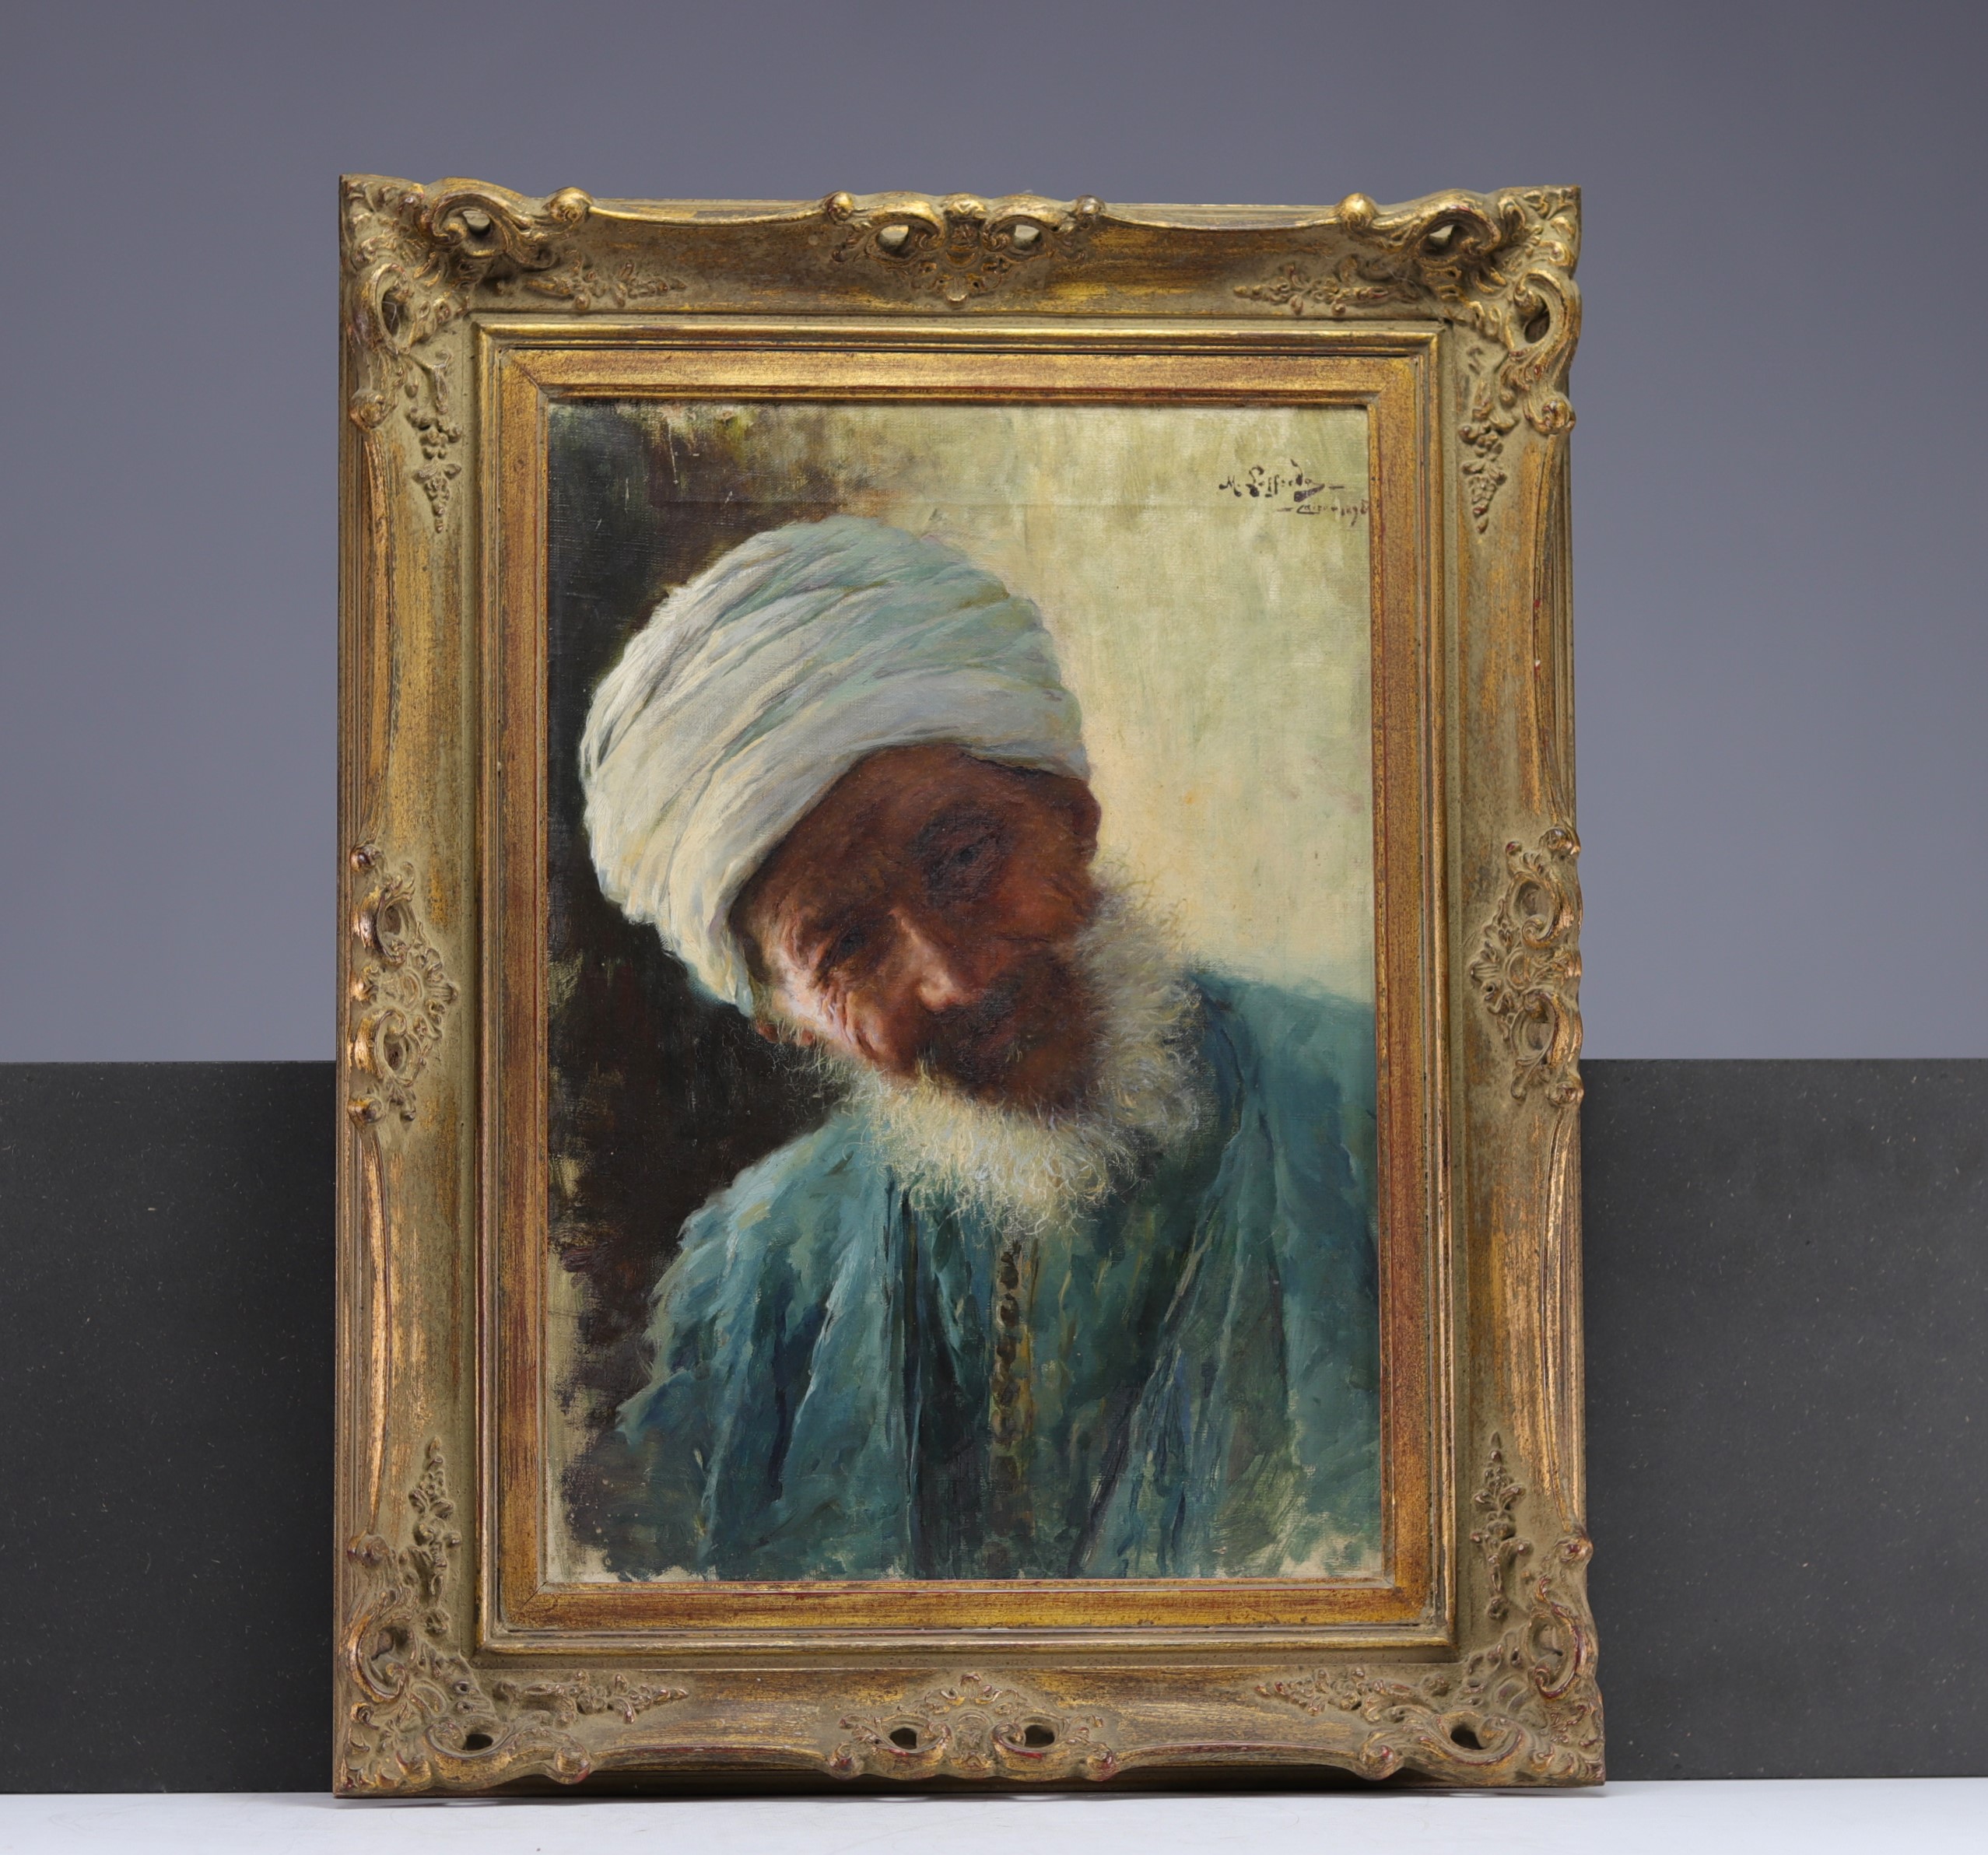 Michele LOFFREDO (1870-1961), Pair of Orientalist Portraits, oil on canvas signed and dated 1898. - Image 2 of 3